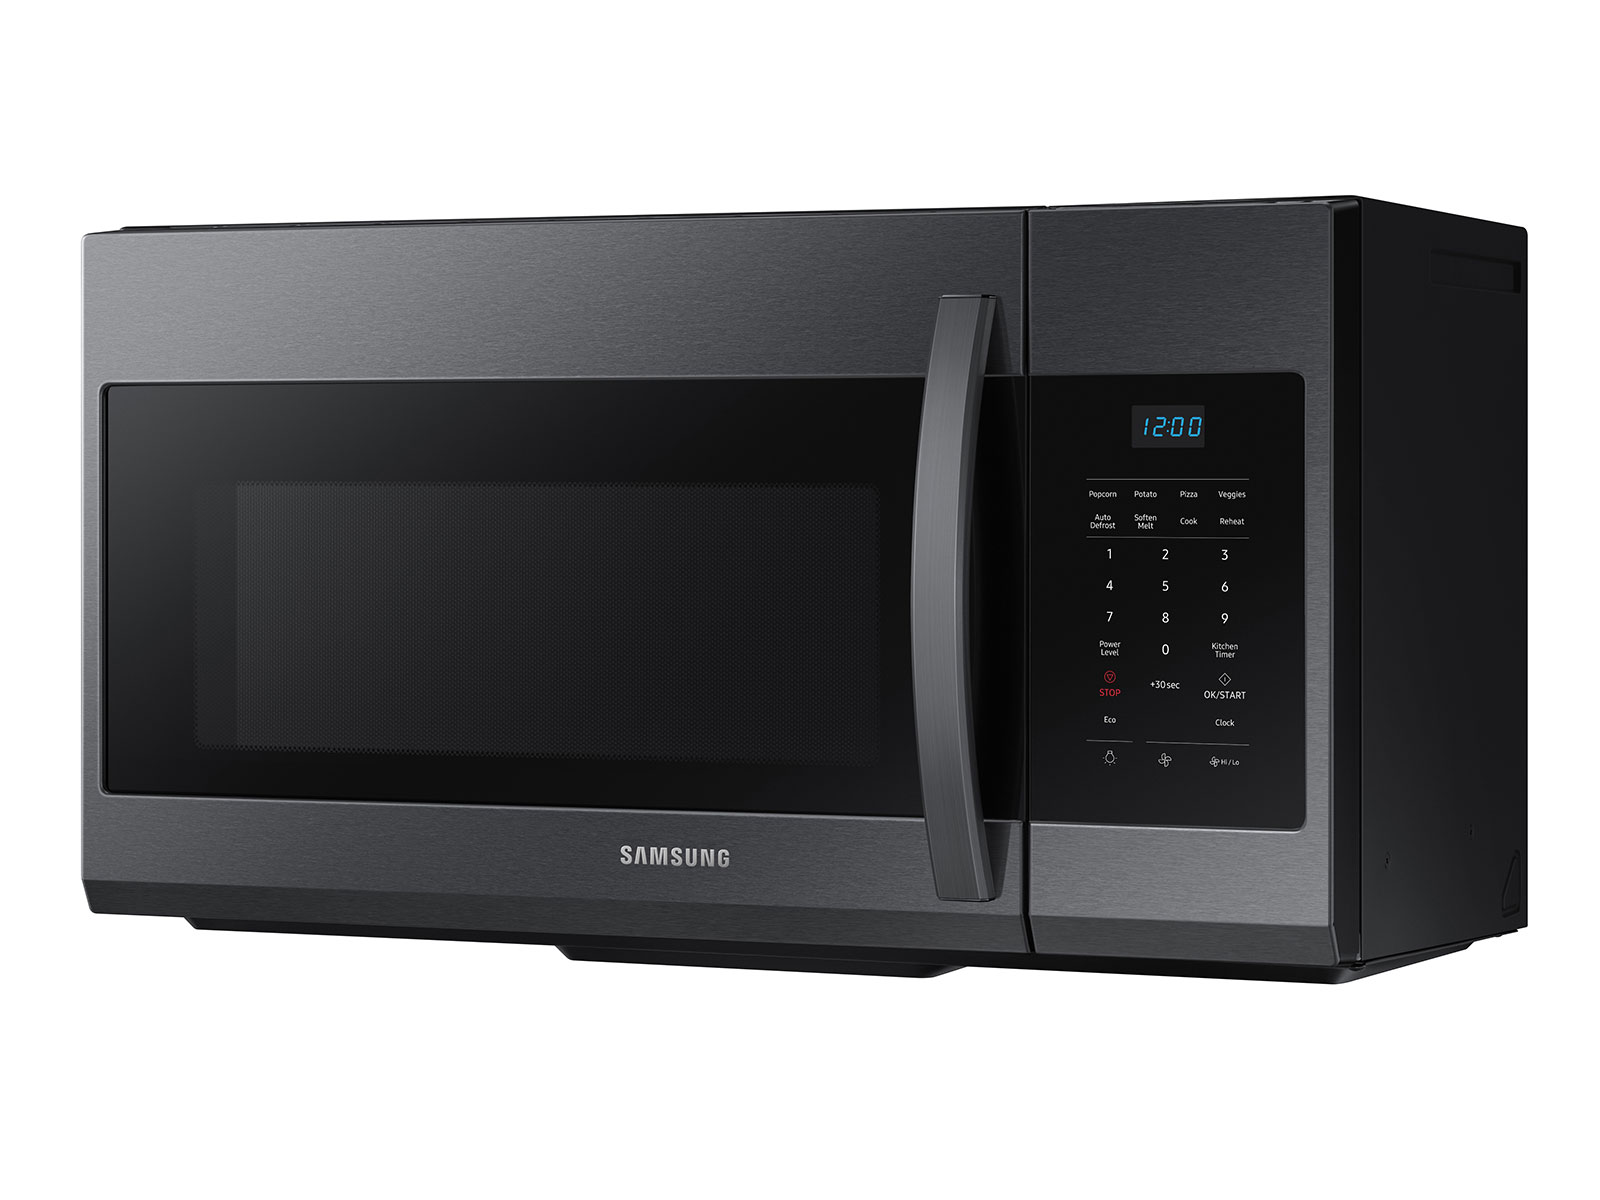 Thumbnail image of 1.7 cu. ft. Over-the-Range Microwave in Black Stainless Steel